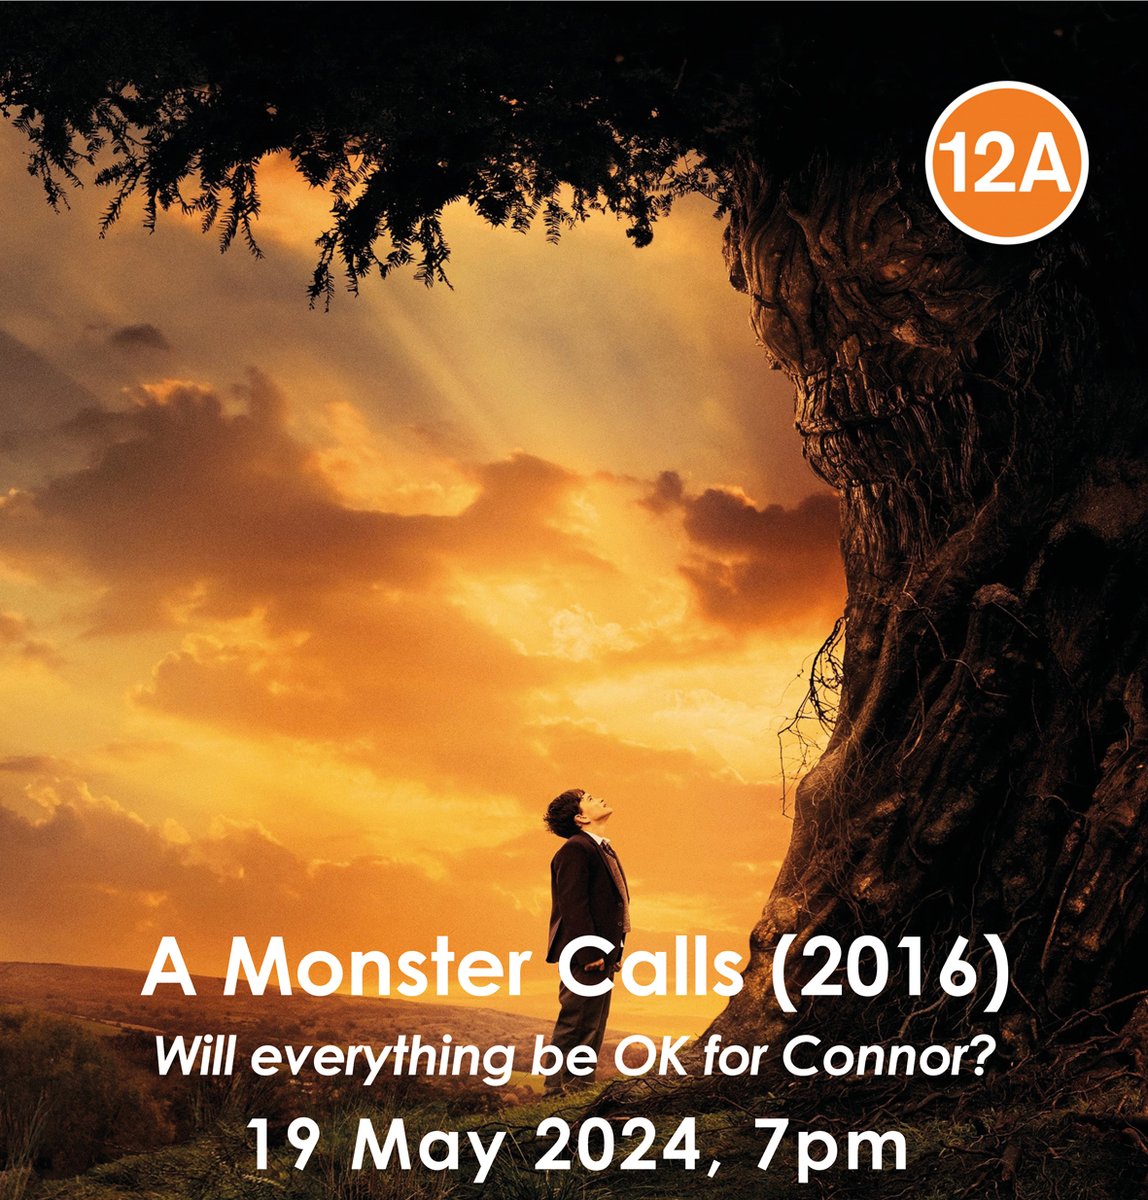 Coming up this Sun 19 May at @highburytheatre in Sutton Coldfield check out J A Bayona’s emotional adaptation of children’s story A Monster Calls (2016) starring Liam Neeson, Sigourney Weaver, Felicity Jones &Lewis MacDougall highburytheatre.co.uk/event/hc-a-mon…